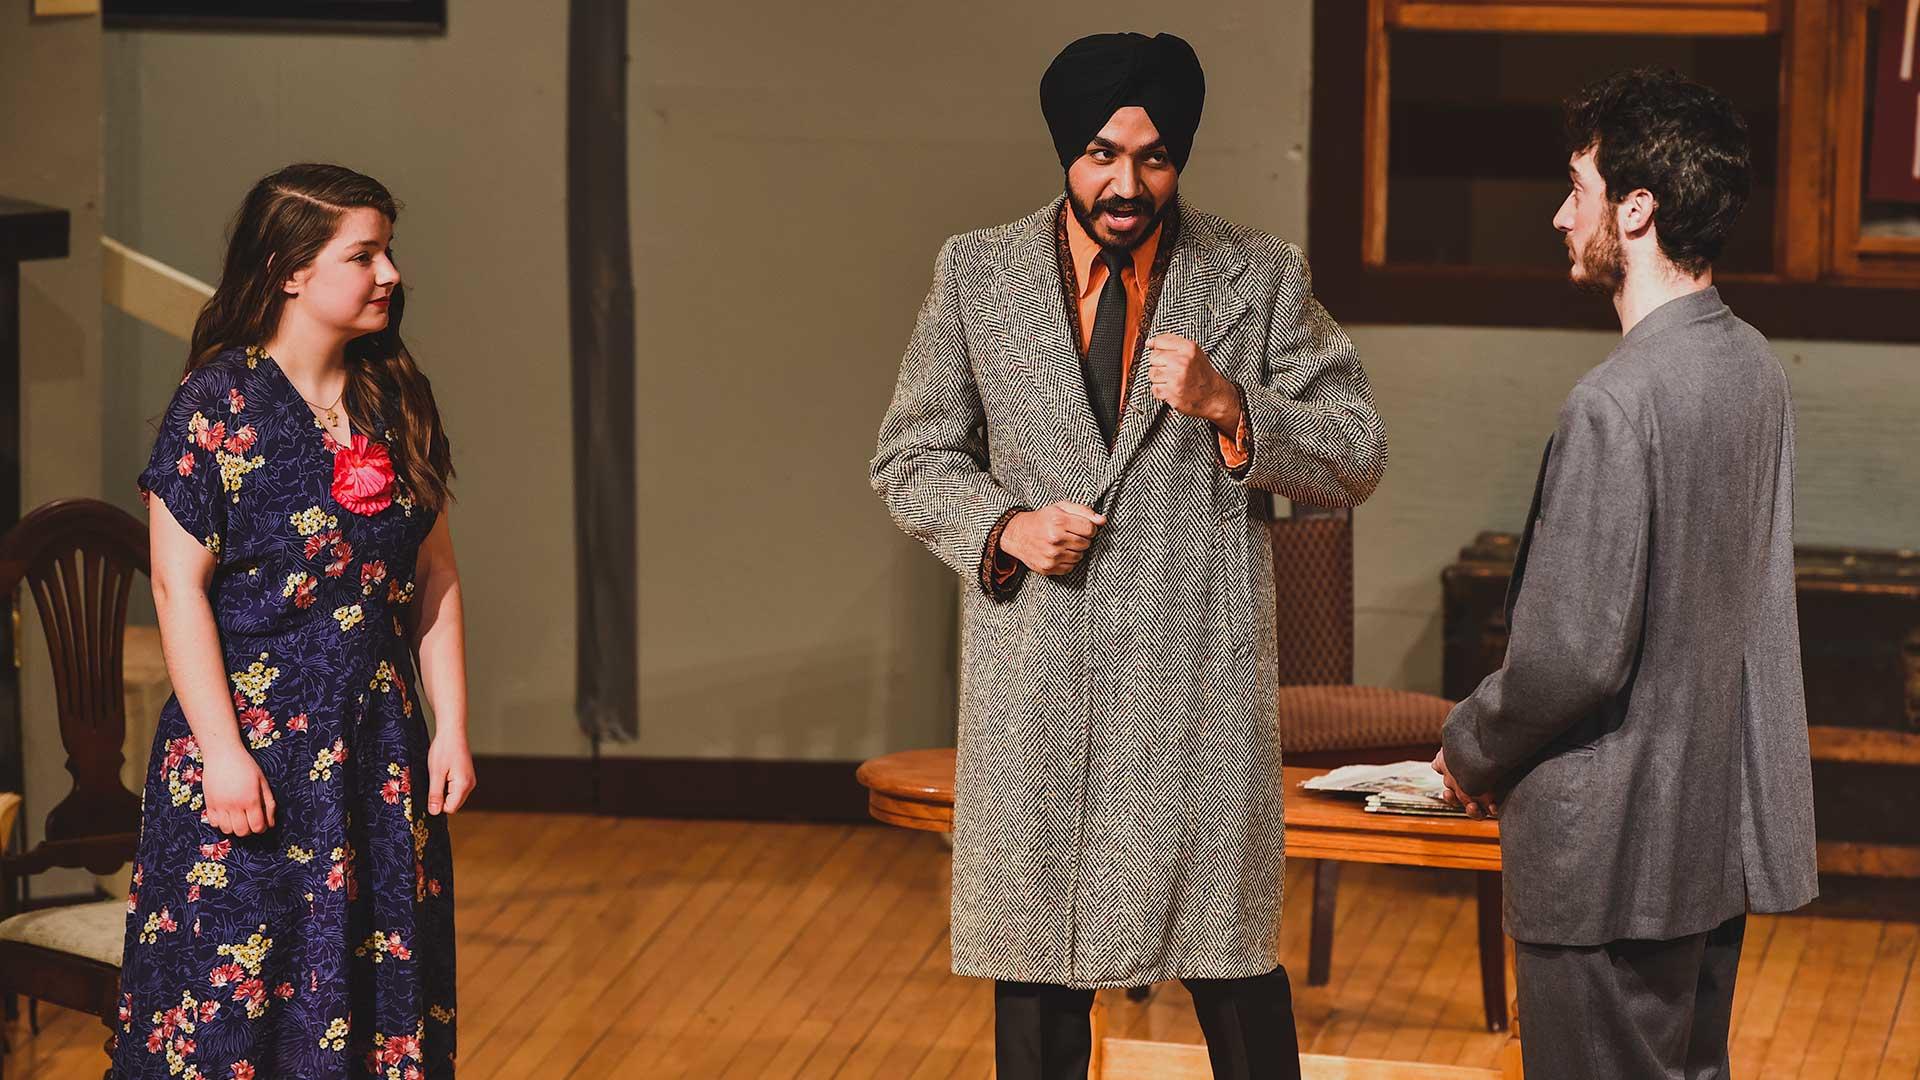 Students performing in a play in Kiehle Auditorium